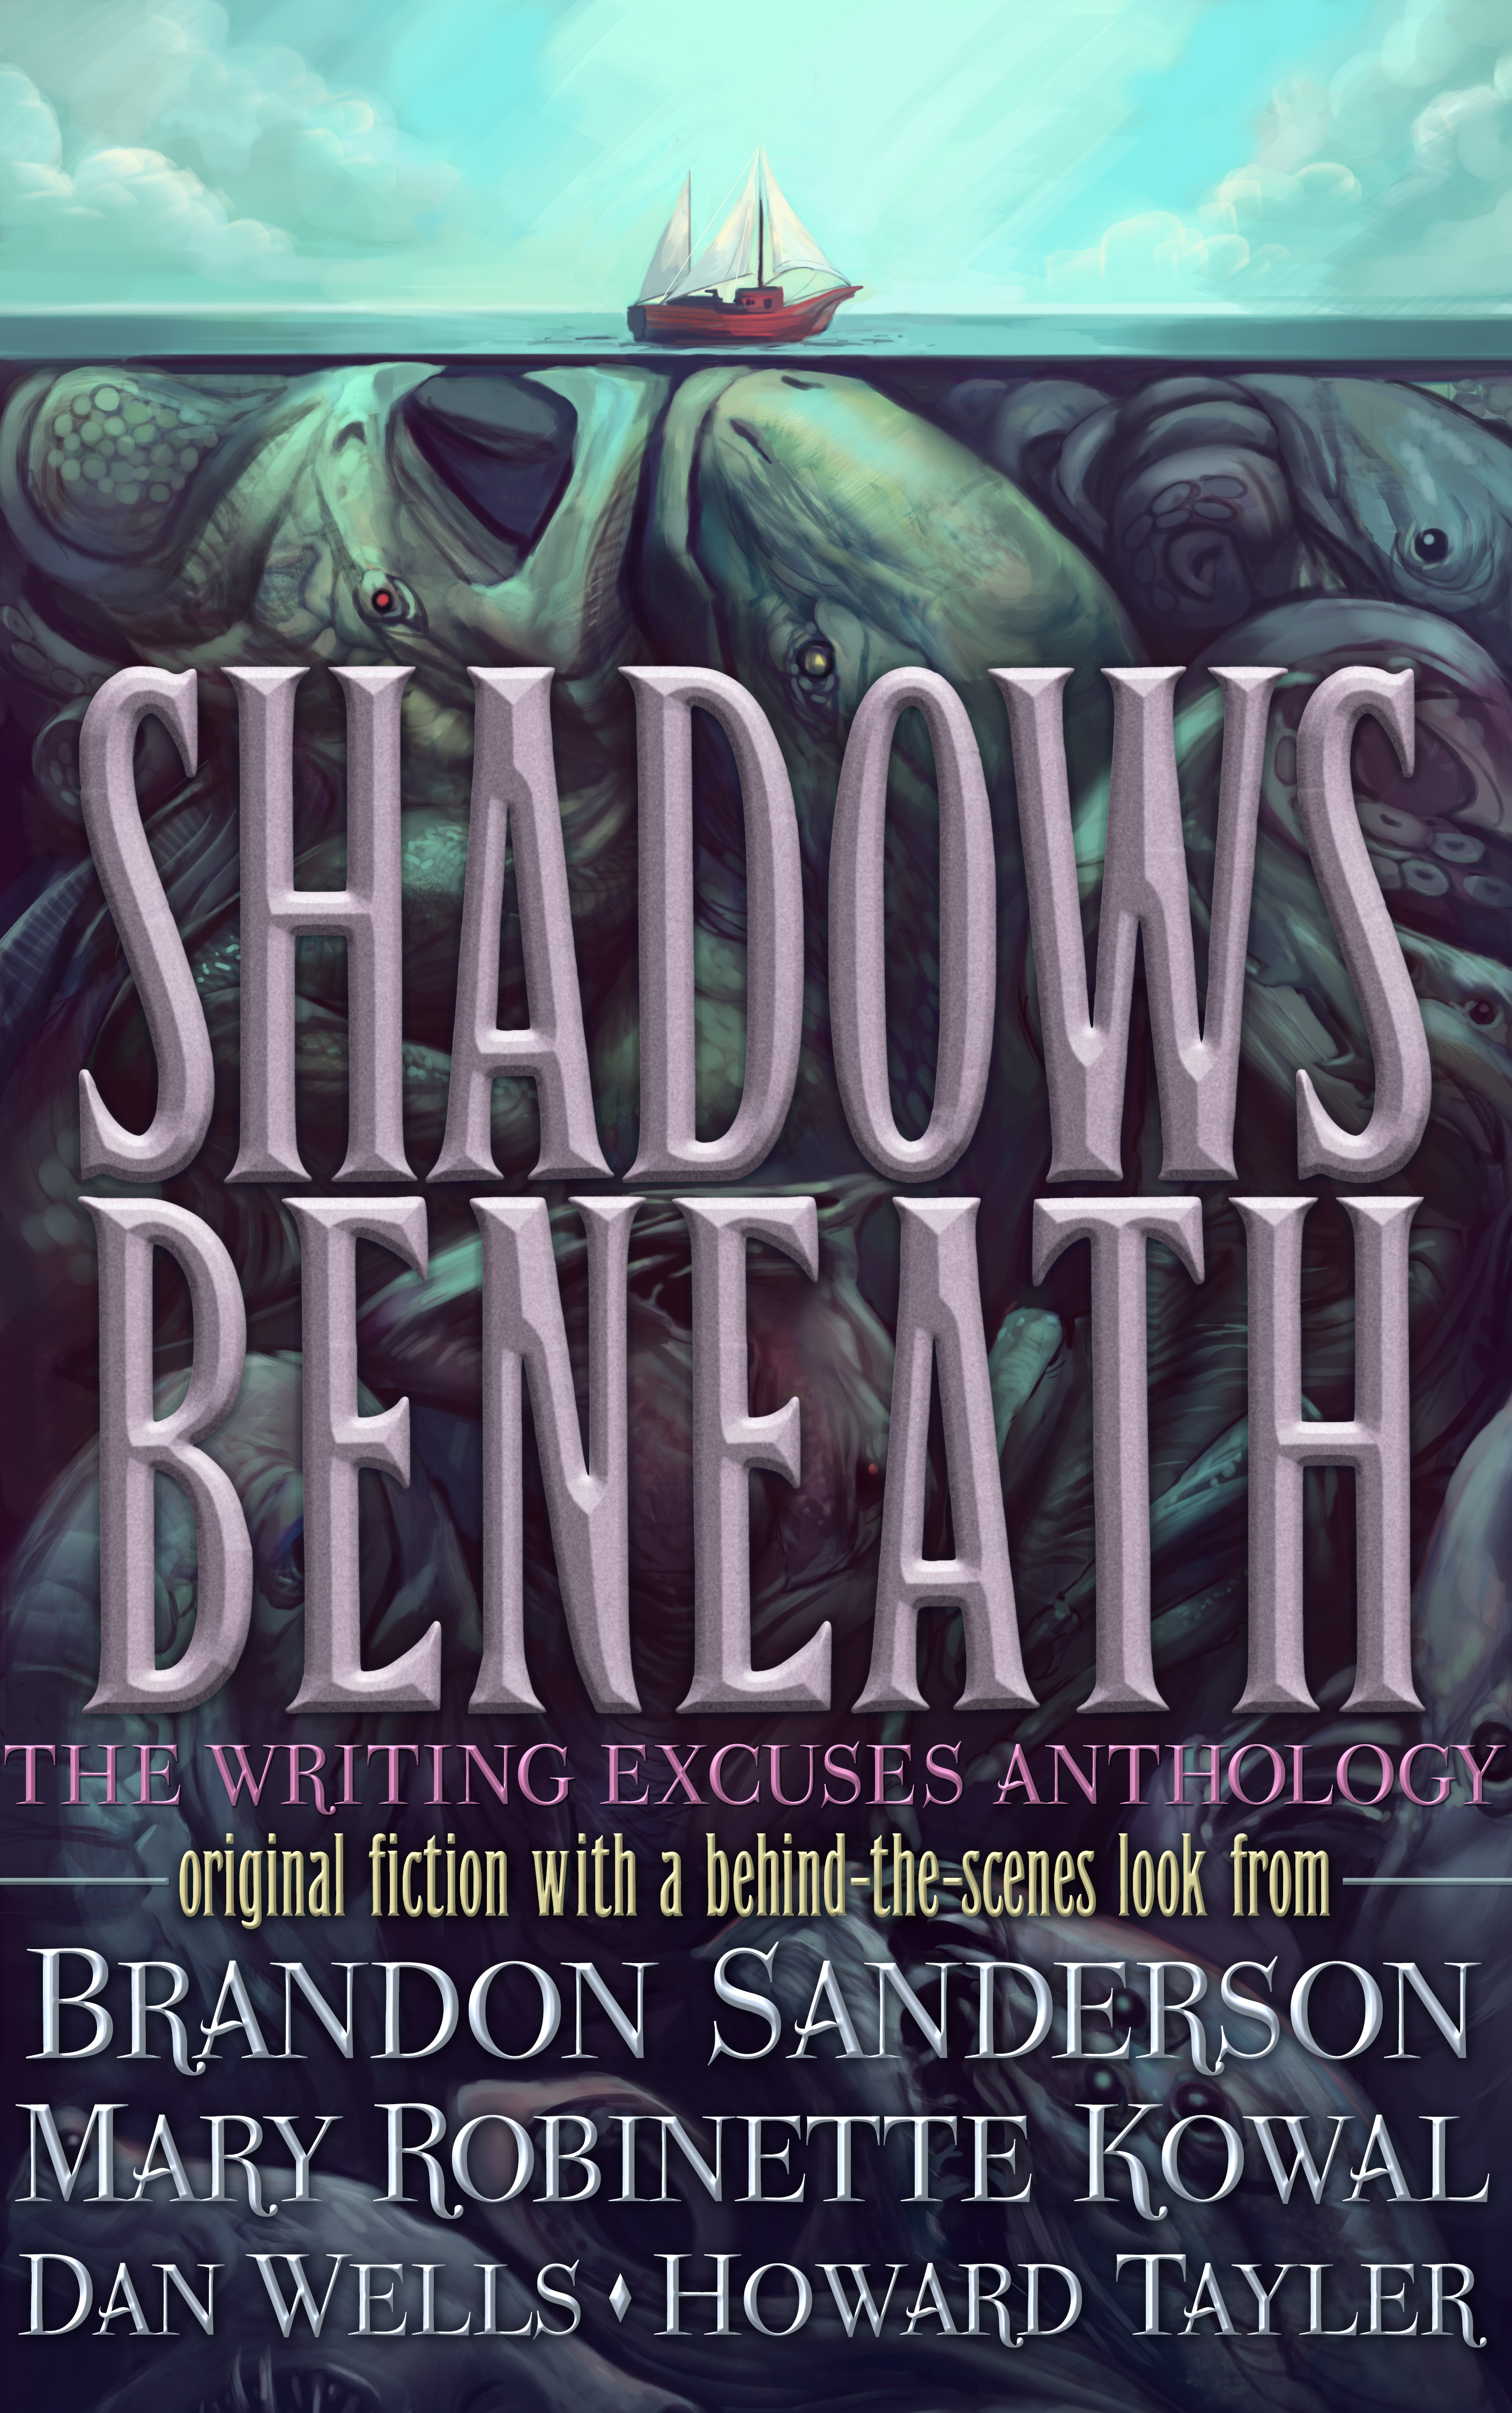 More information about "Shadows Beneath and Sixth of the Dusk Available Now"